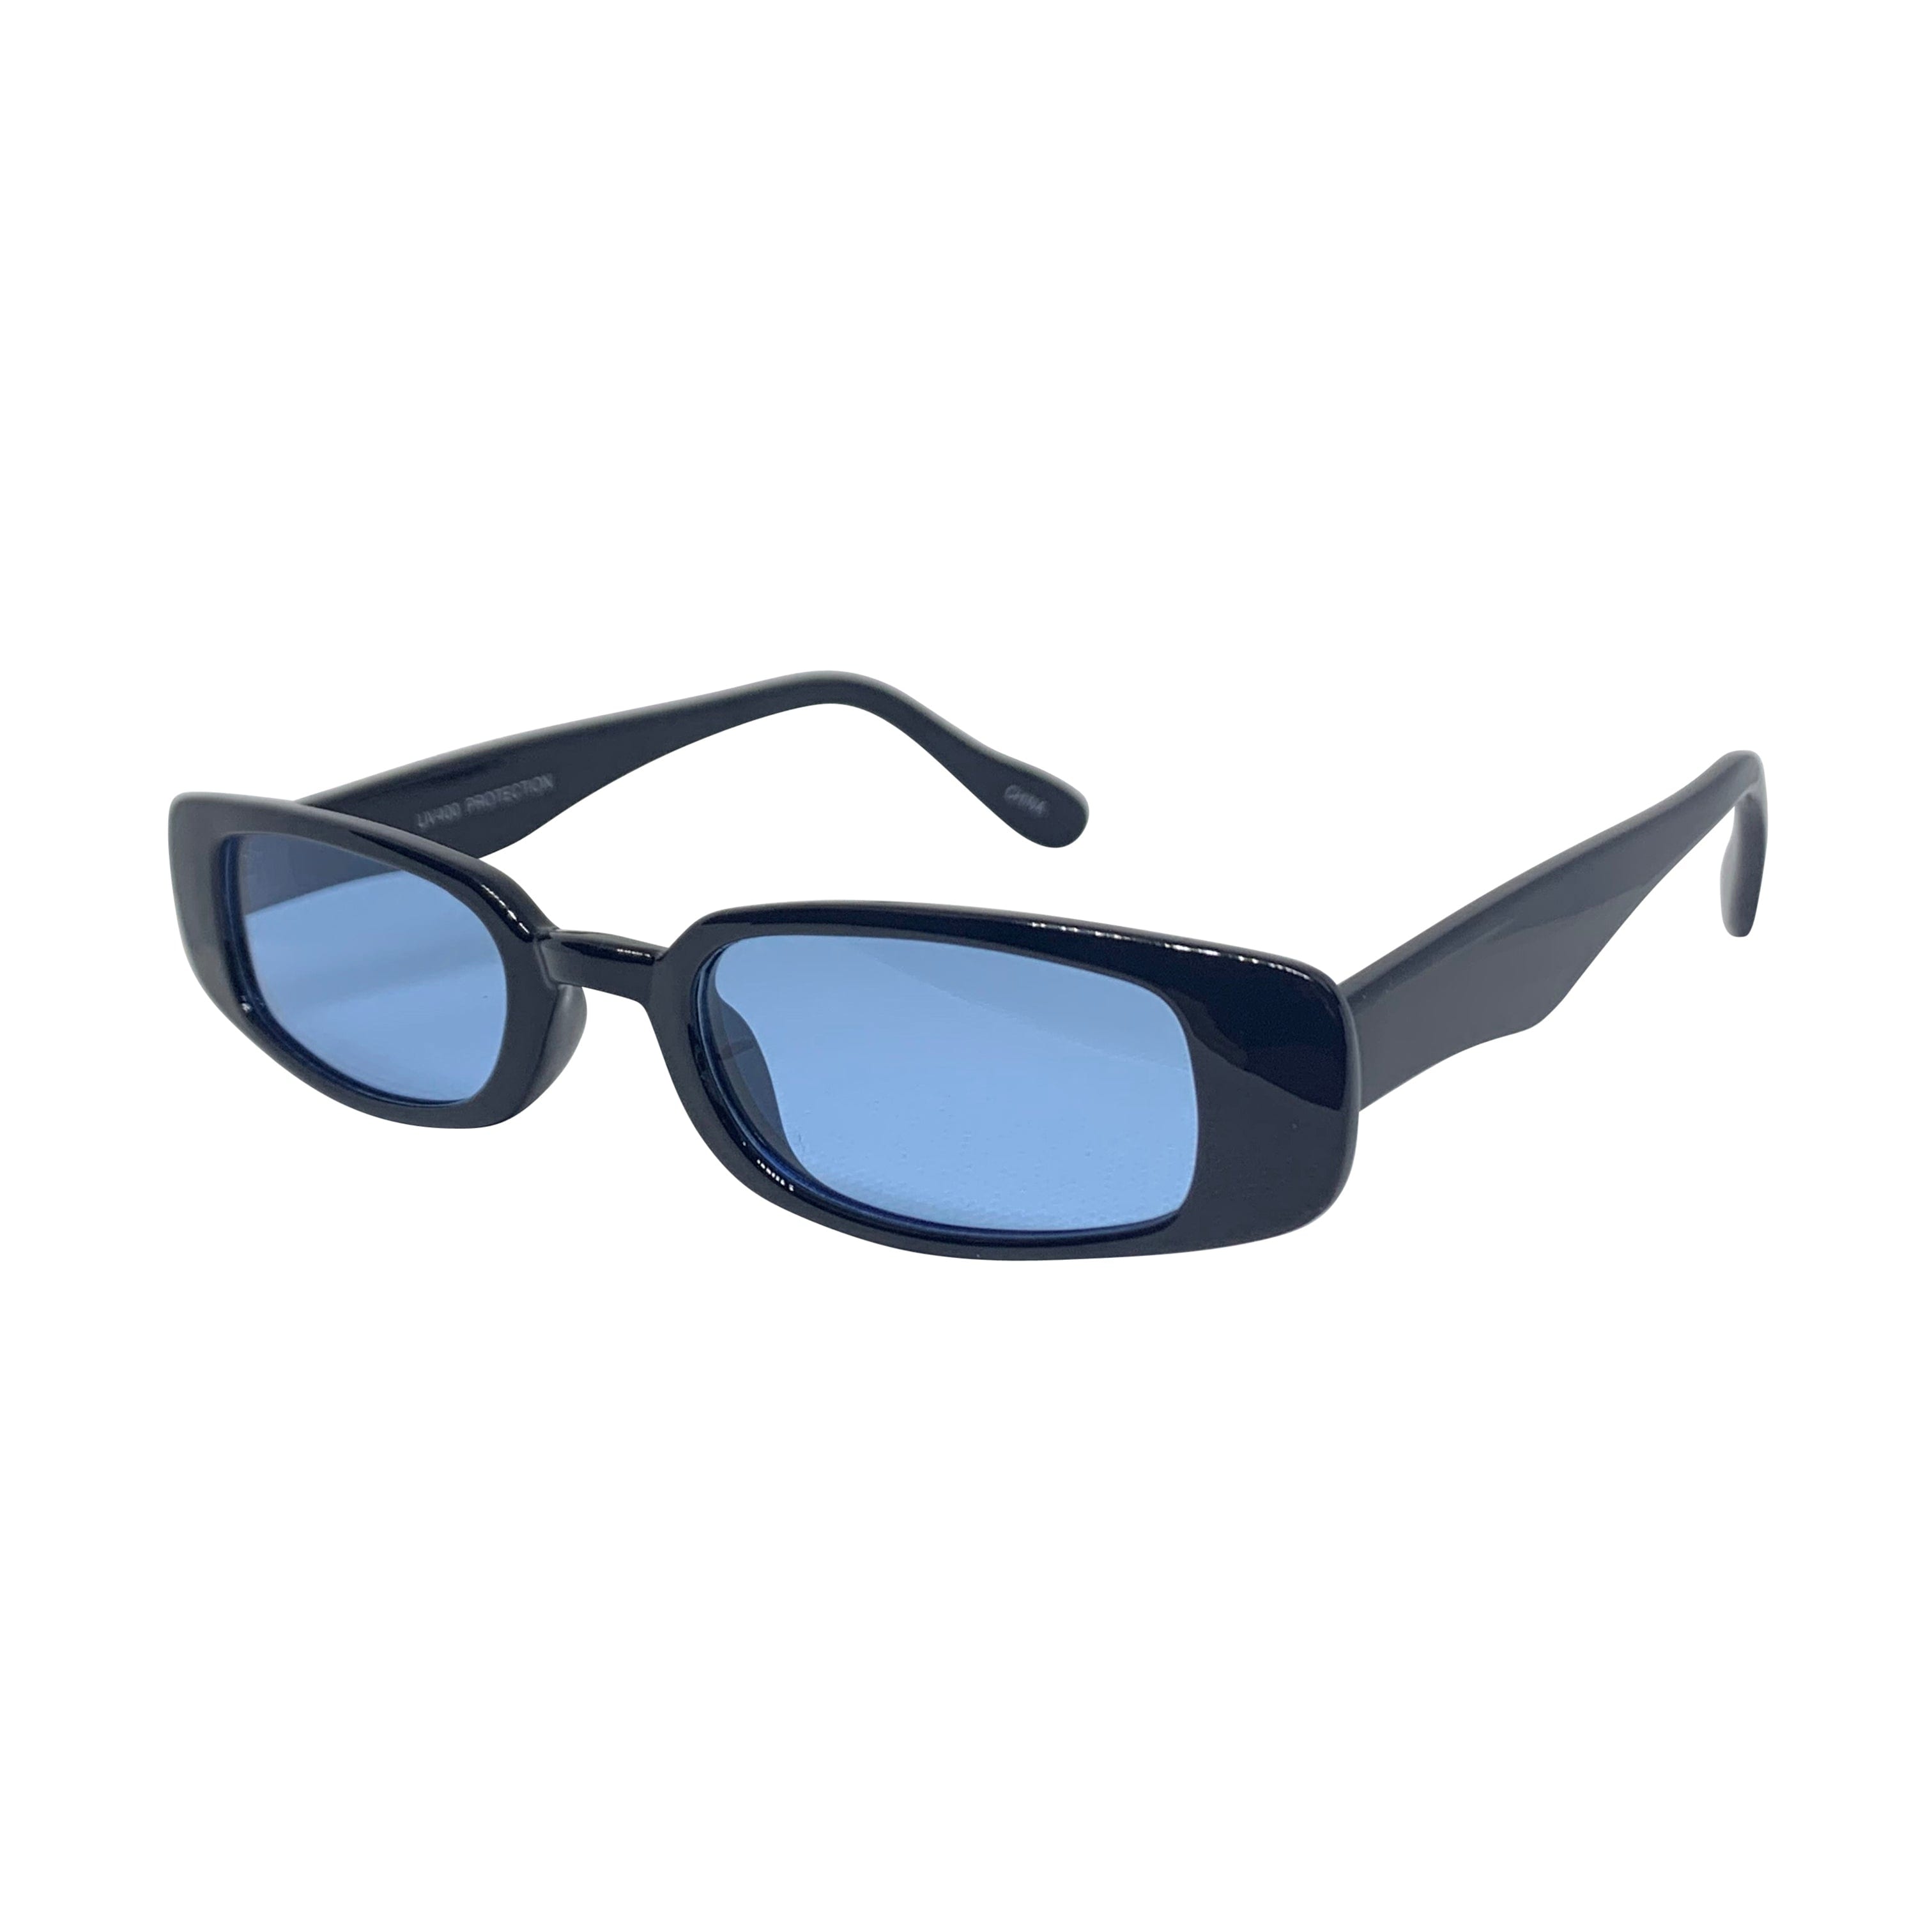 SKWAT Black and Blue 90s Style Sunnies